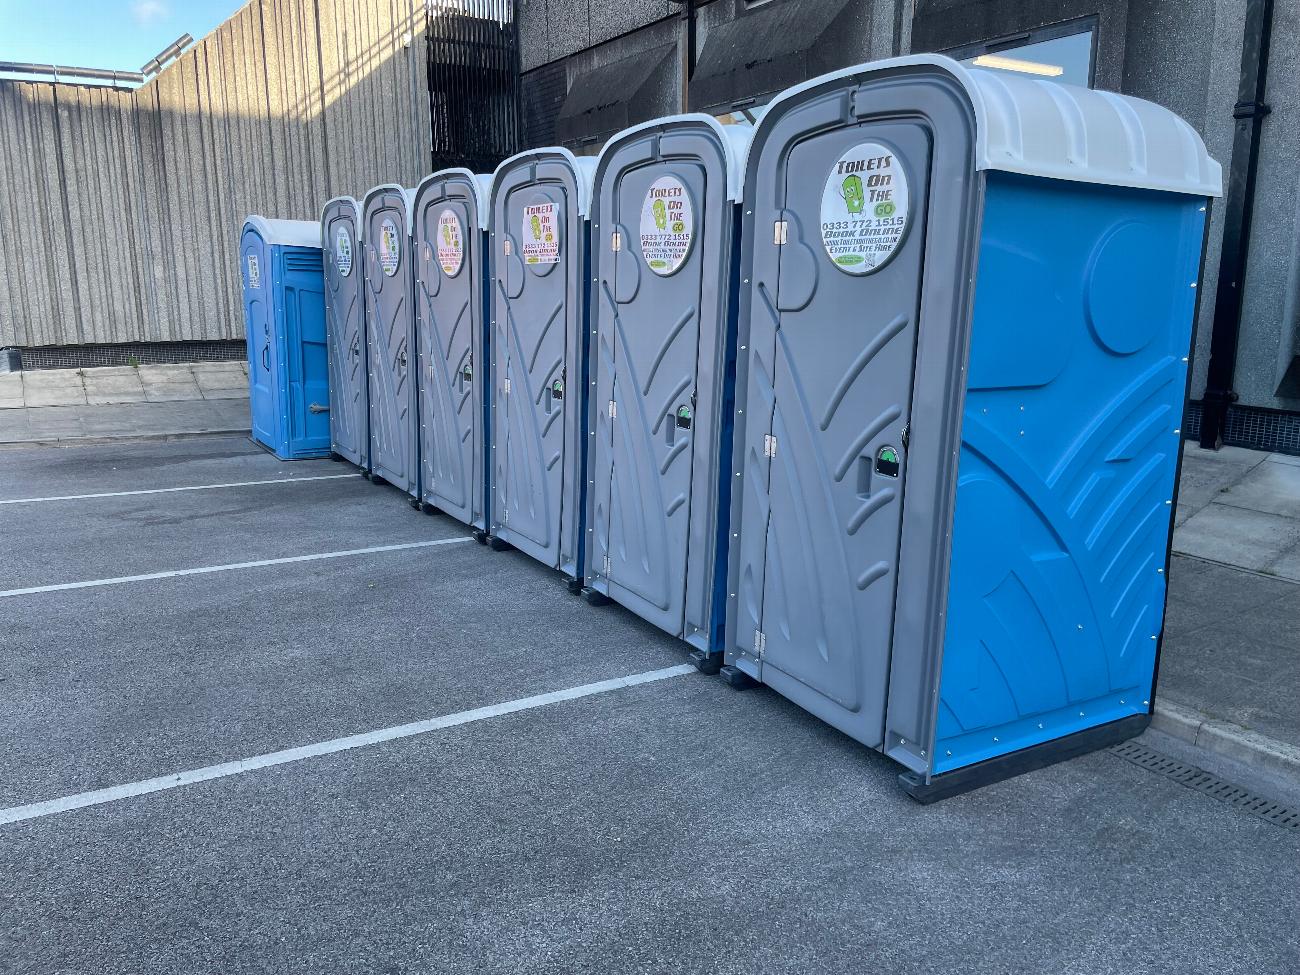 Gallery | Portable Toilet Loo Hire Rental Company in North West uk and Manchester gallery image 36